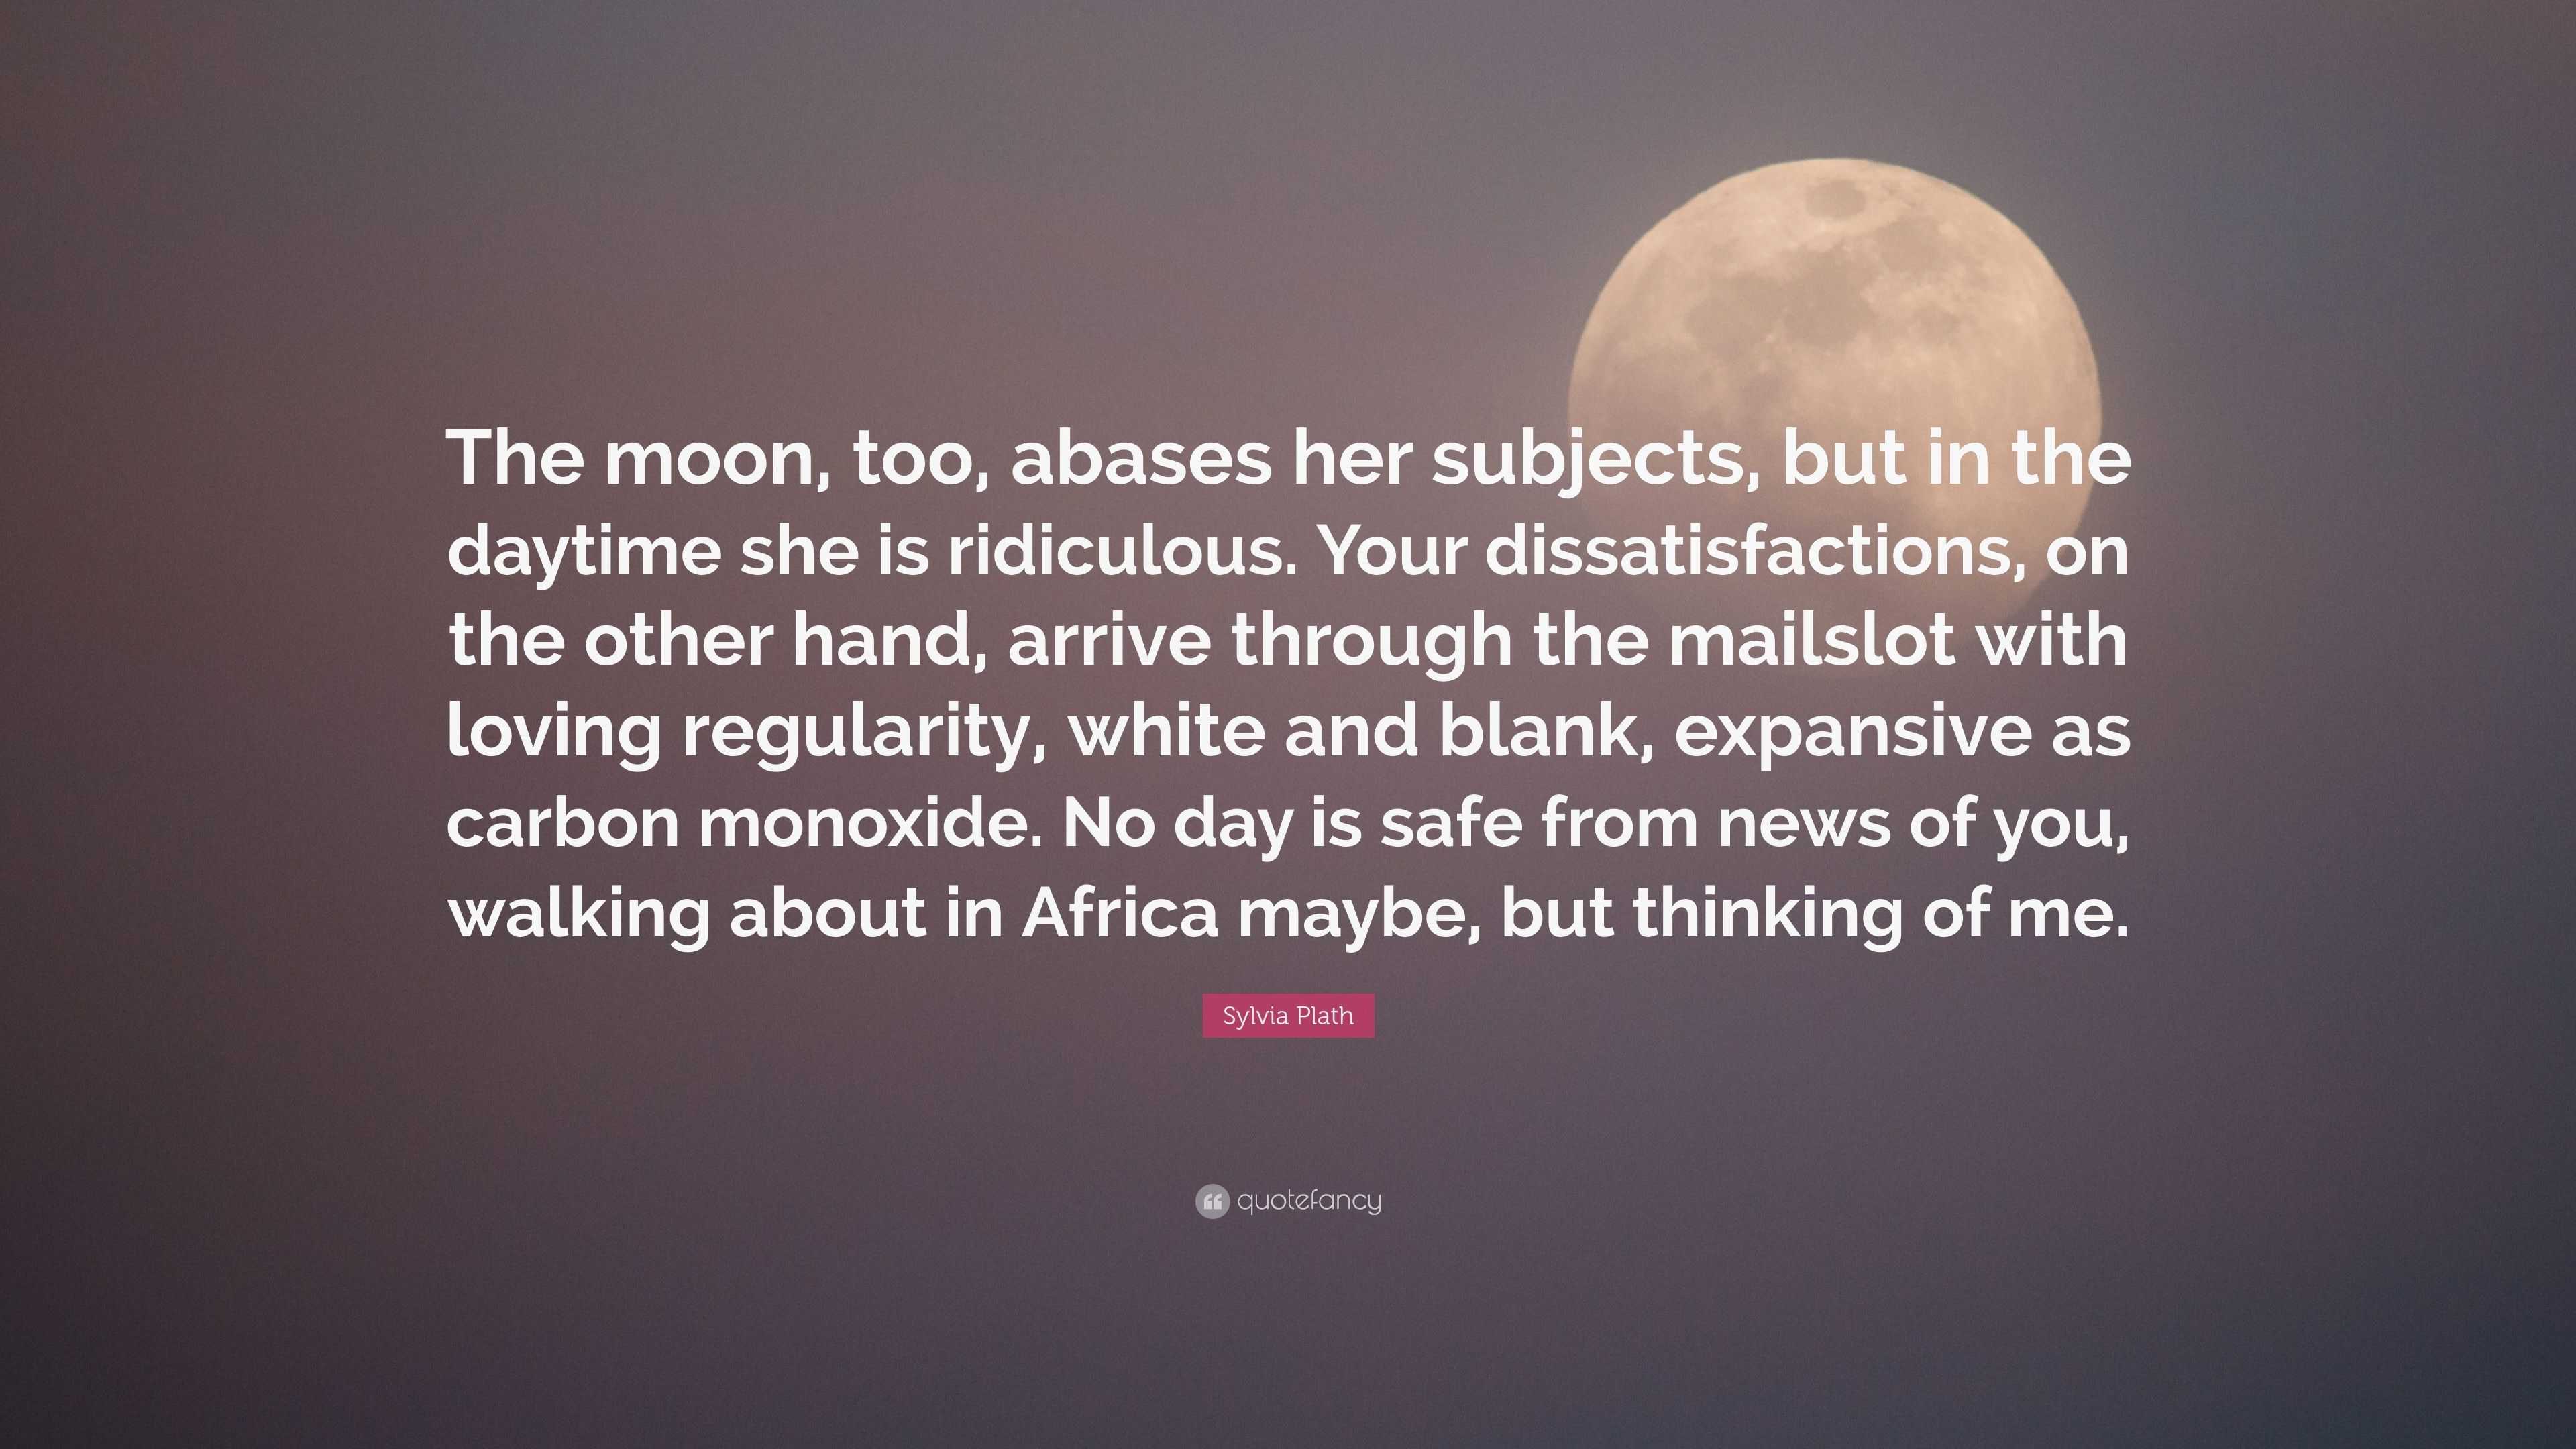 Sylvia Plath Quote The Moon Too Abases Her Subjects But In The Daytime She Is Ridiculous Your Dissatisfactions On The Other Hand Arri